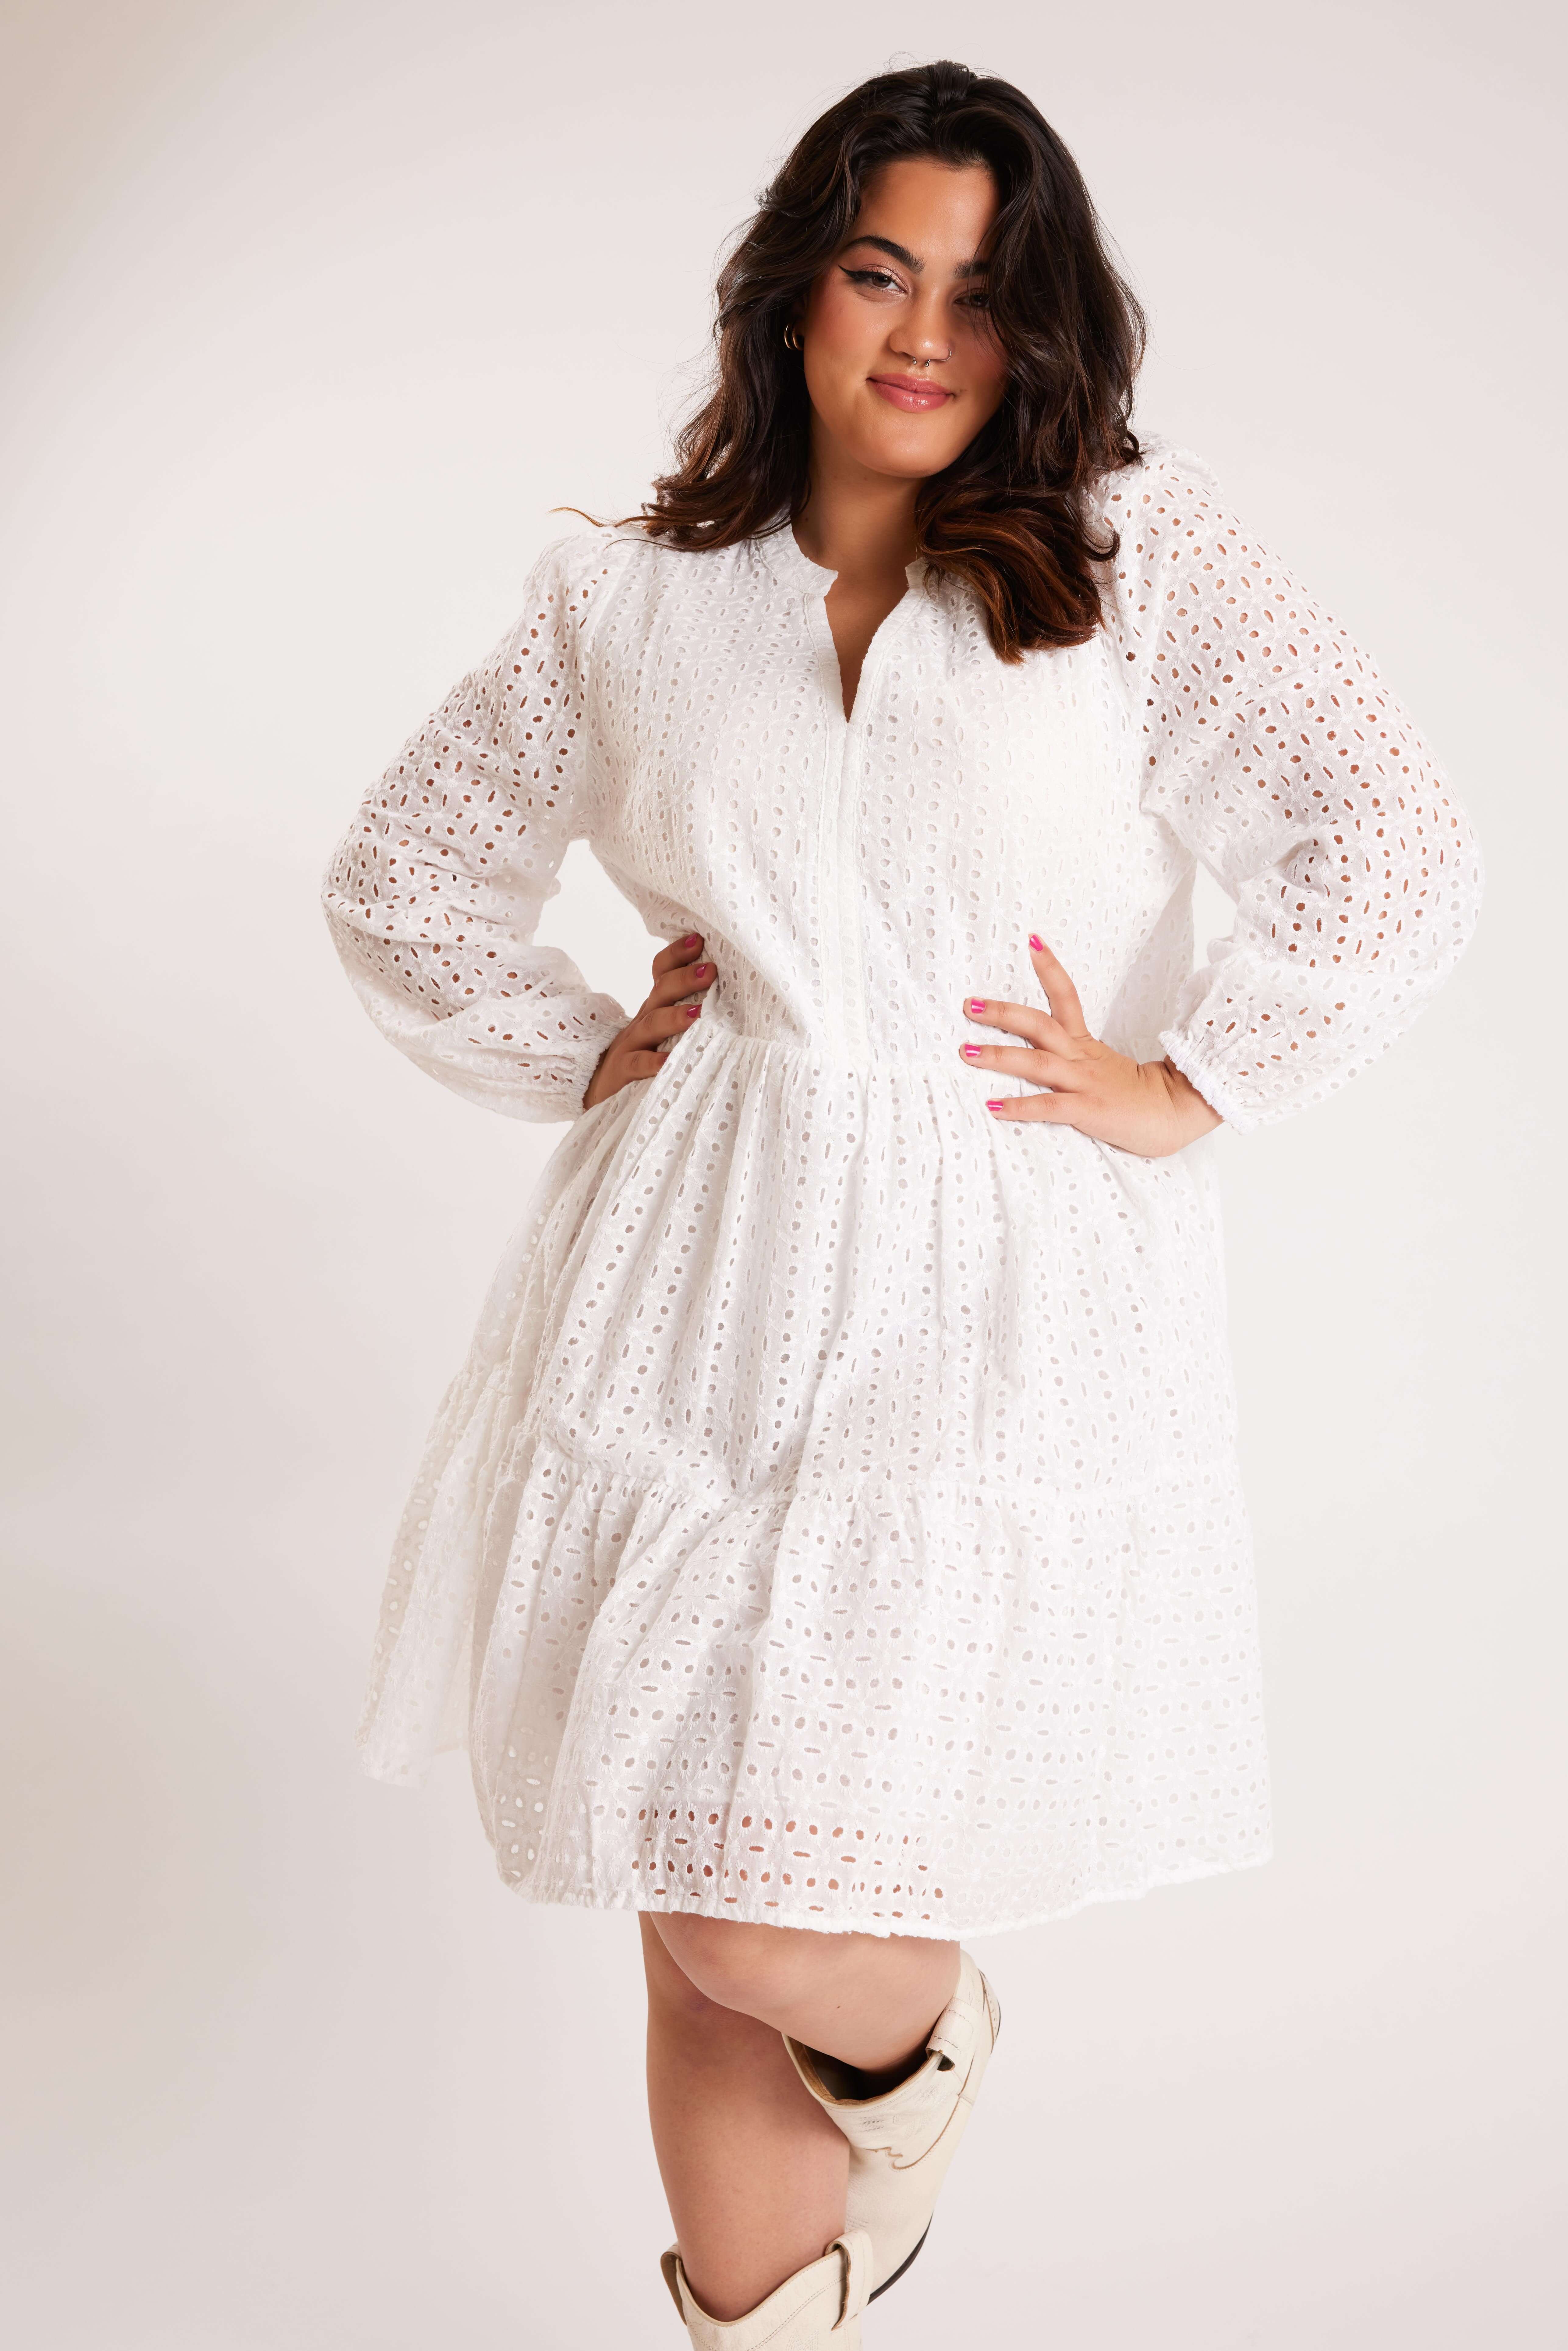 Robe avec broderie anglaise image 7